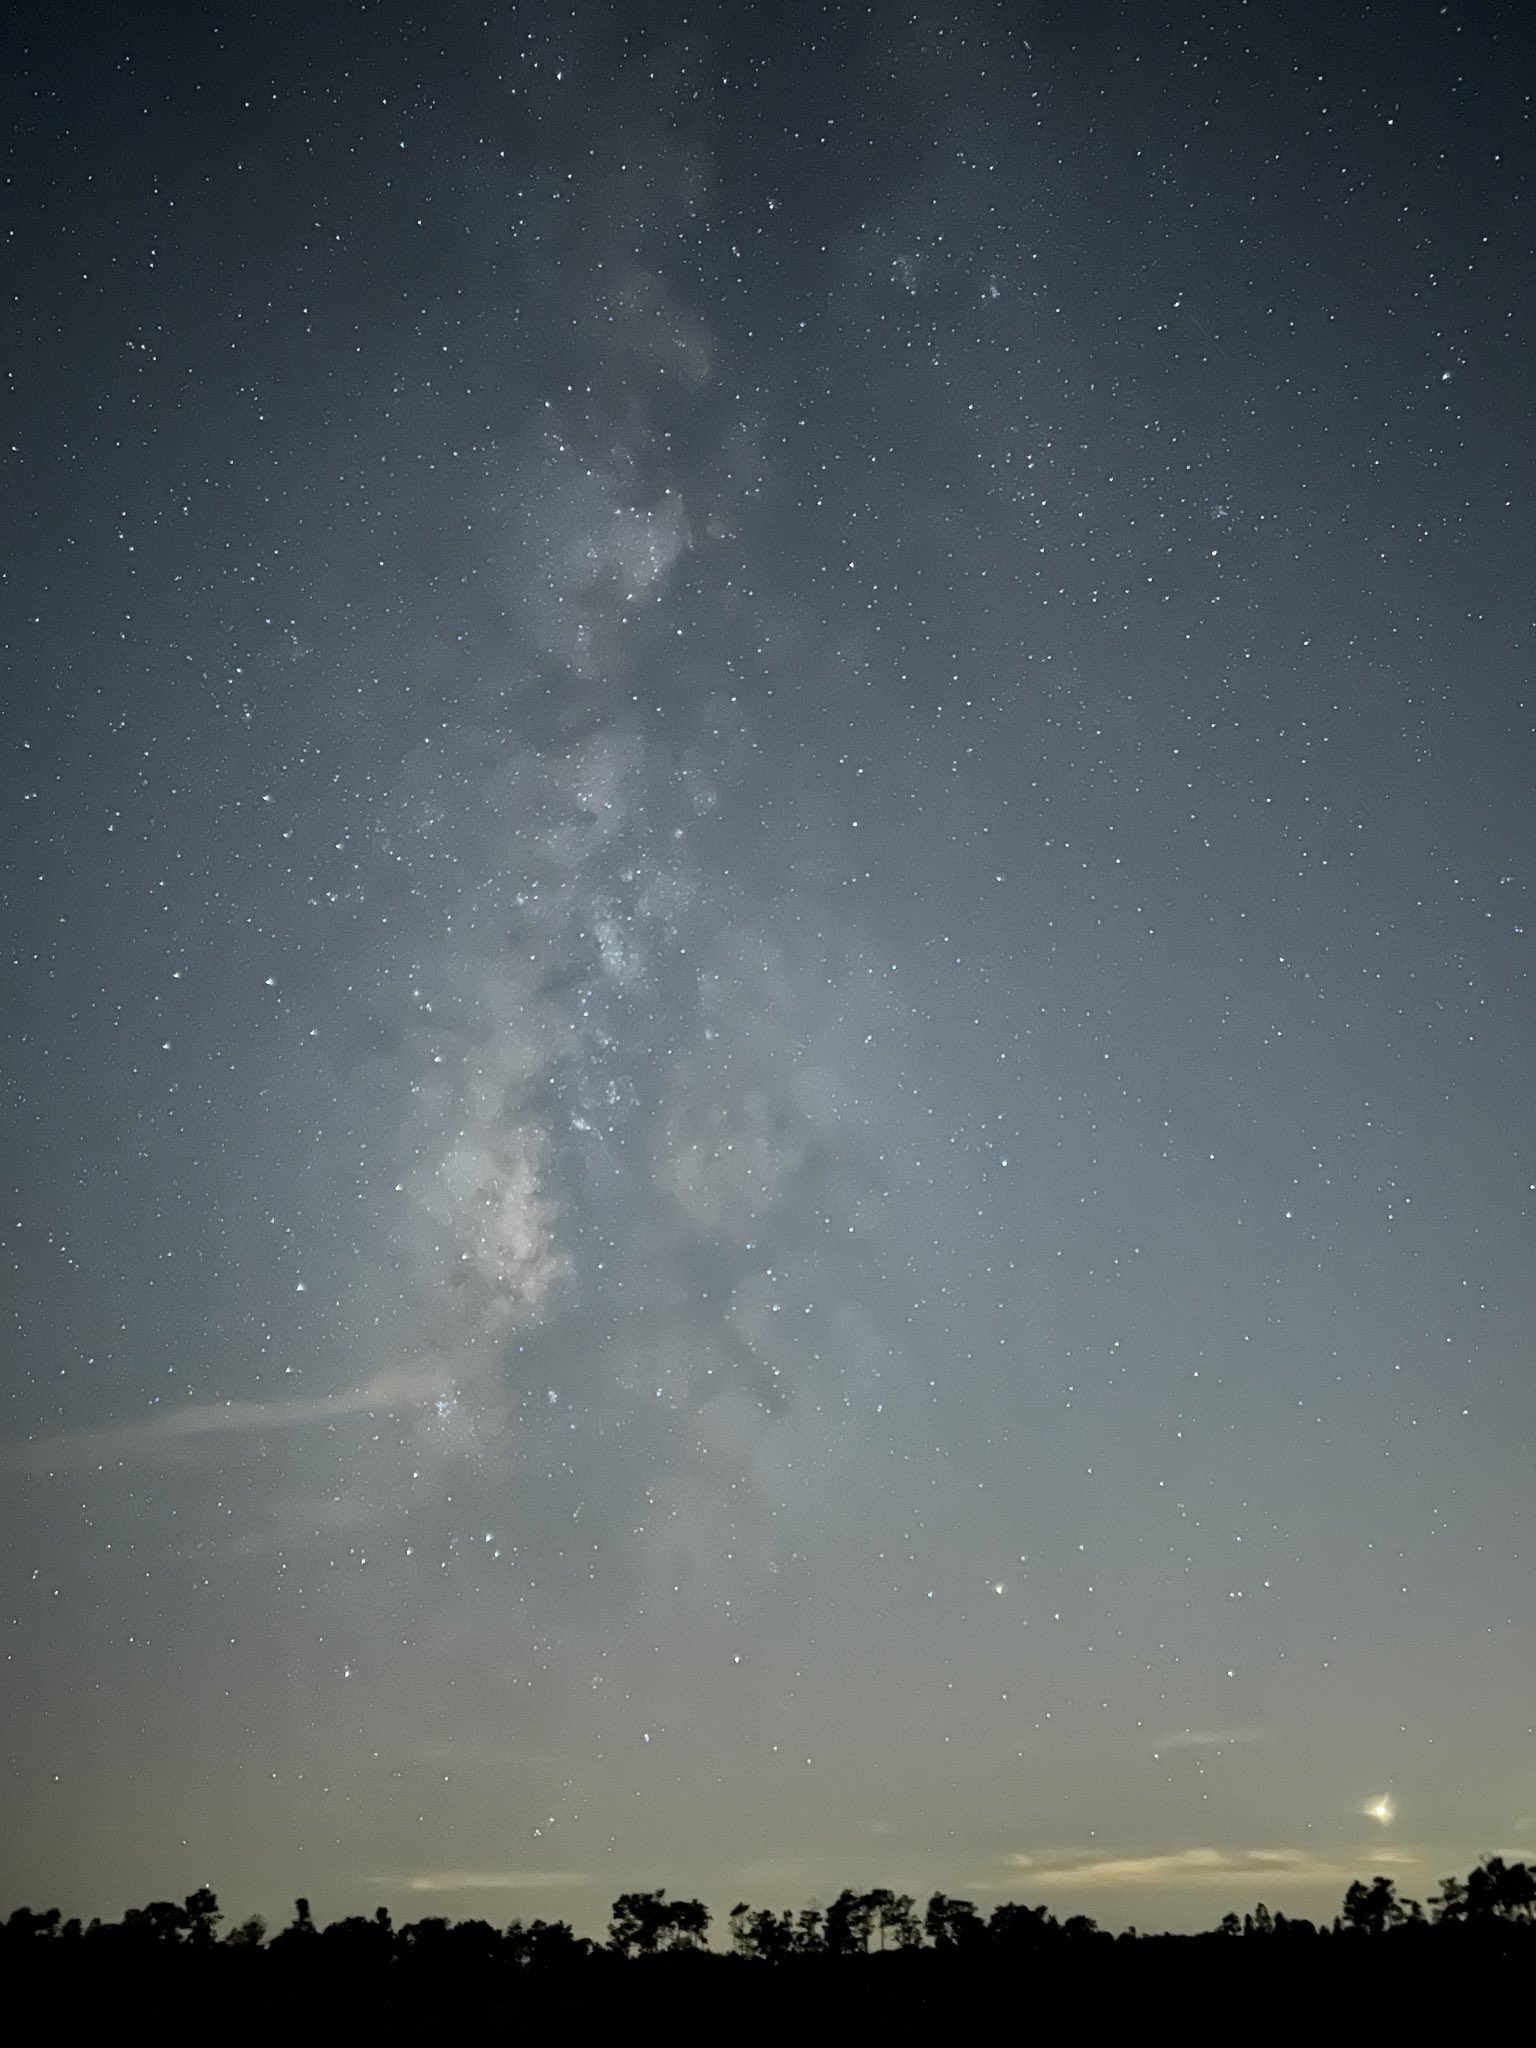 An image showing a 30-second exposure of the Milky Way taken with the iPhone 13 Pro Max camera in Apple's ProRaw format 